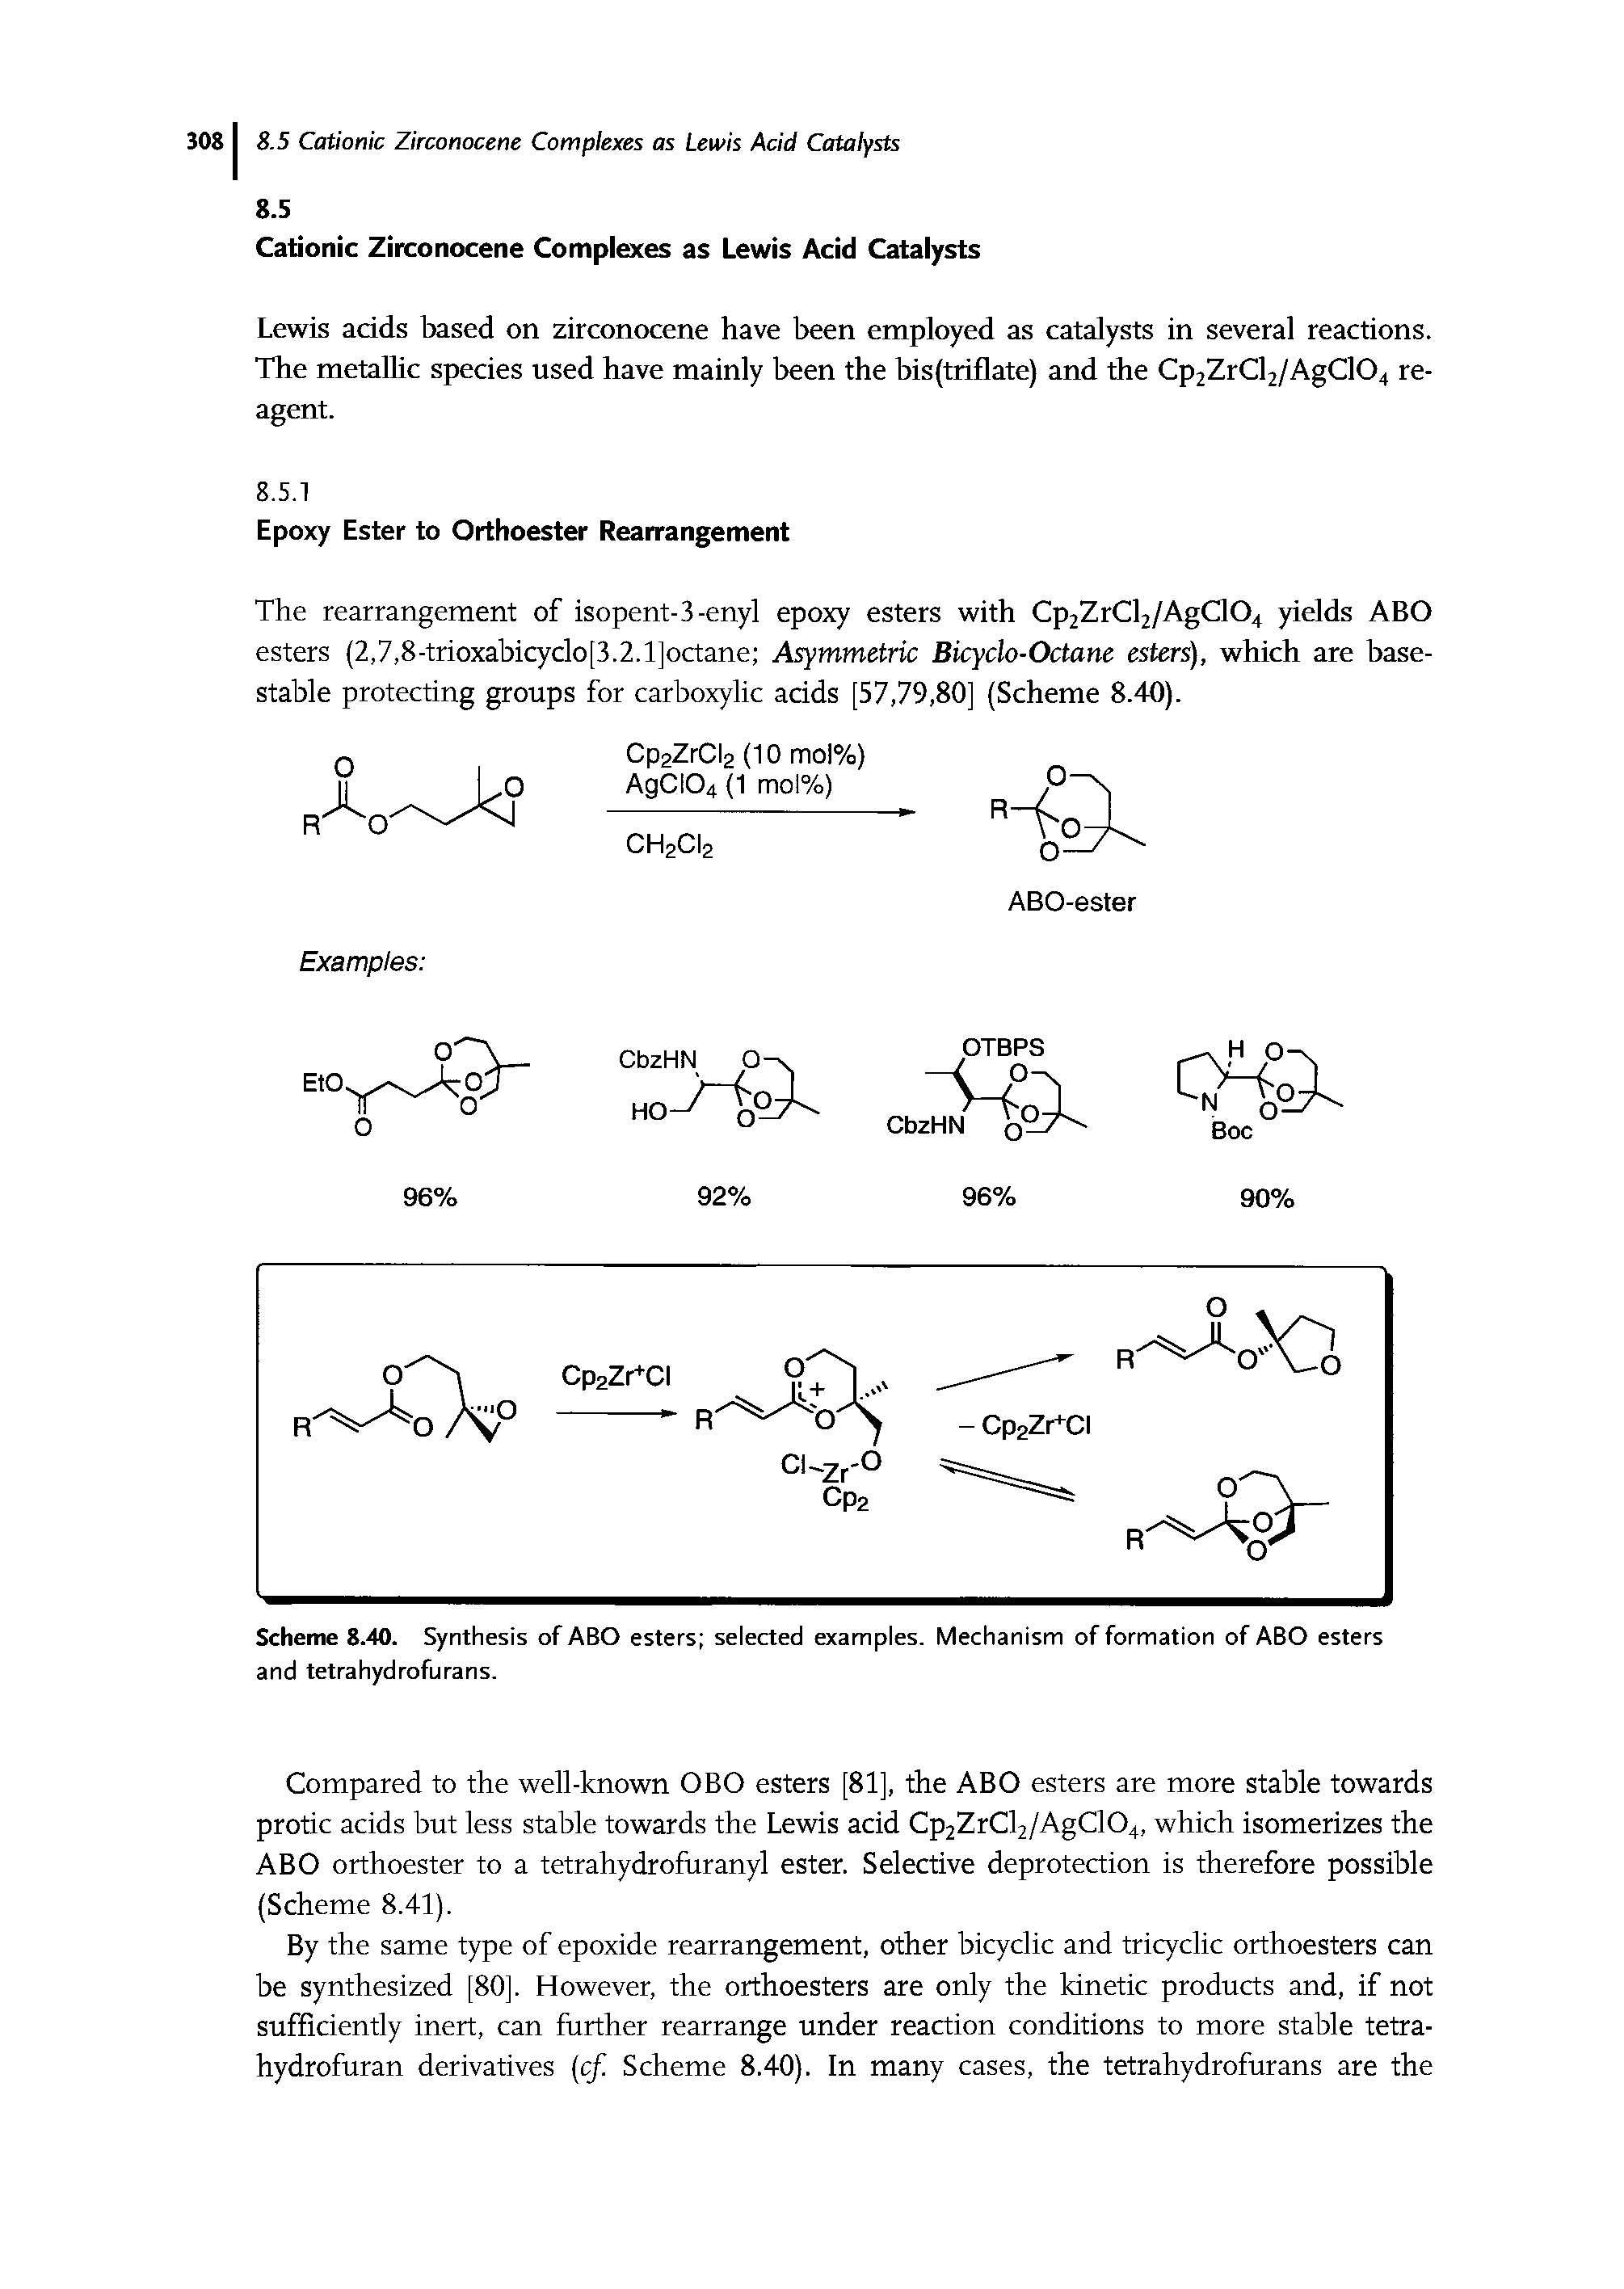 Scheme 8.40. Synthesis of ABO esters selected examples. Mechanism of formation of ABO esters and tetrahydrofurans.